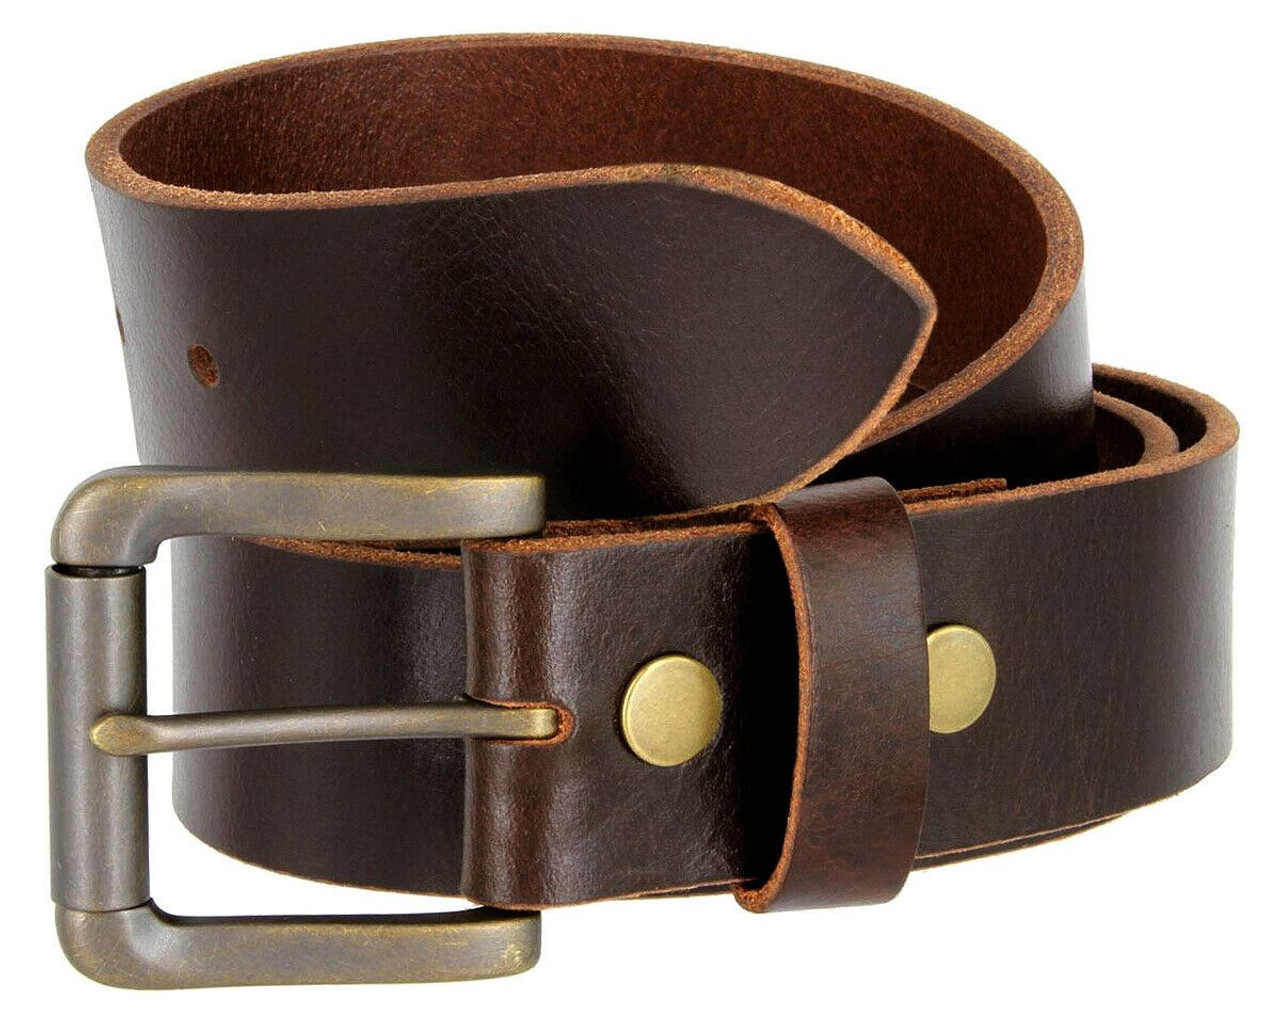 4184 Double Prong Roller Buckle Genuine Full Grain Leather Belt  1-3/8(35mm) Wide Made in USA Belt 